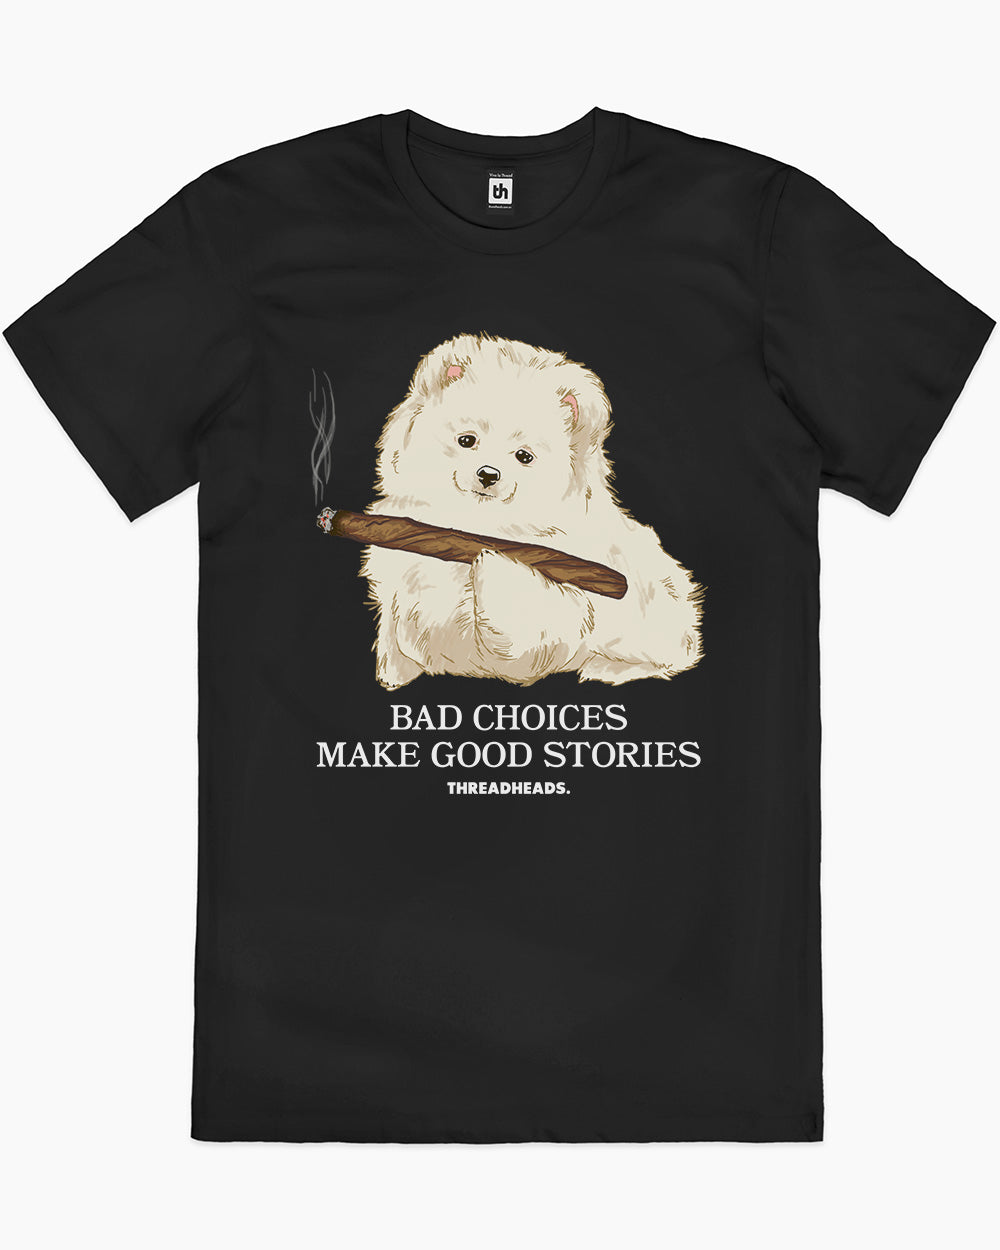 Råd mastermind Tilbageholde Bad Choices Make Good Stories T-Shirt | Funny Shirt | Threadheads Exclusive